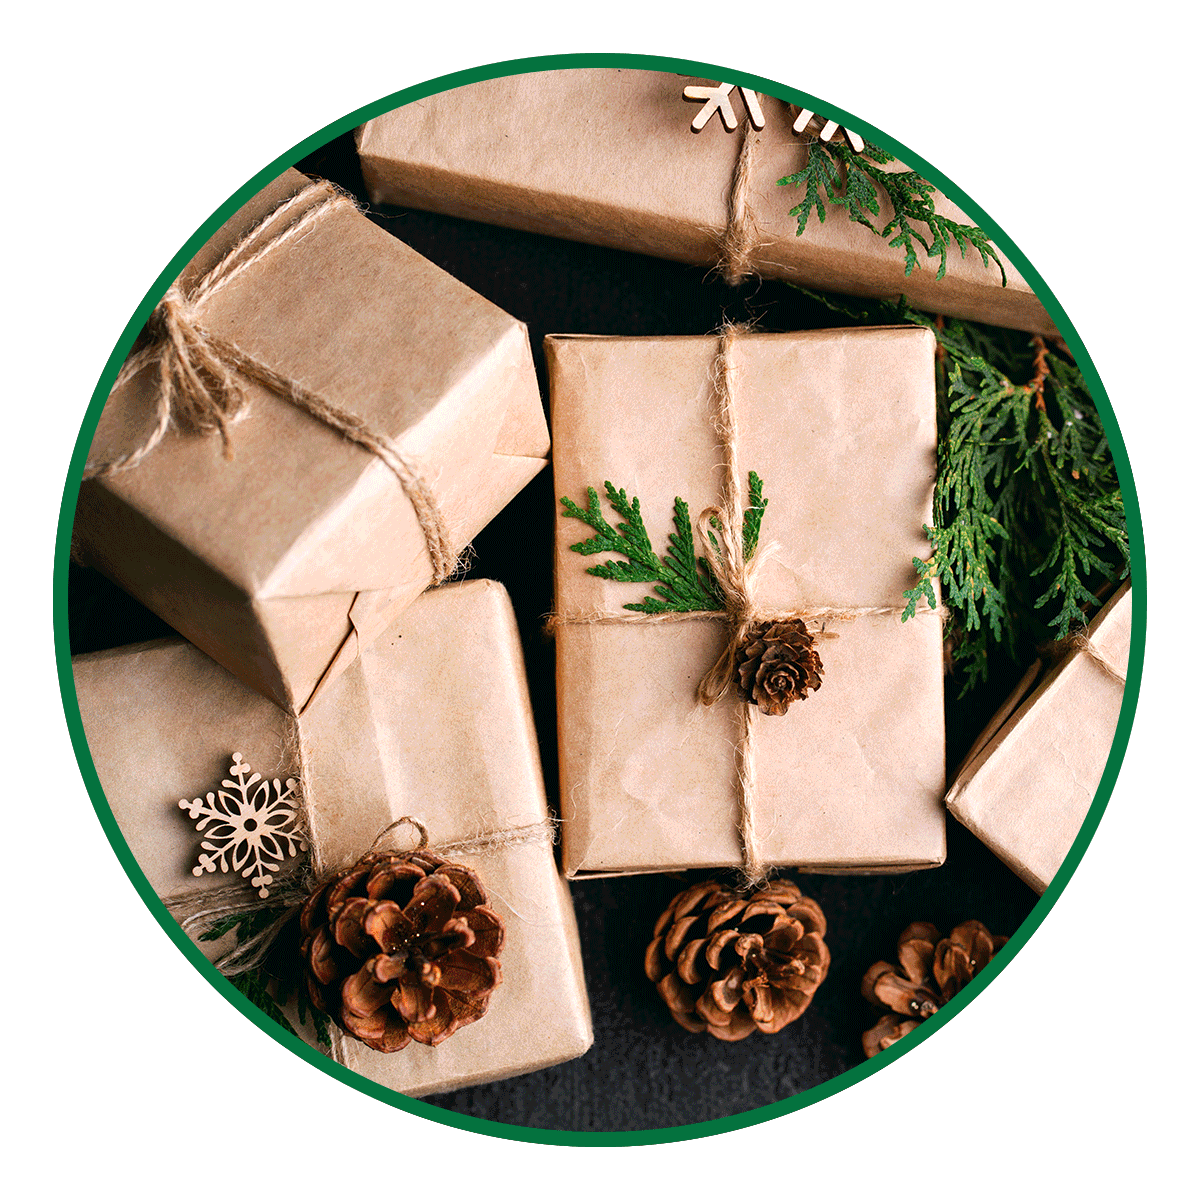 12 Sustainable Wellness Gifts This Holiday Season